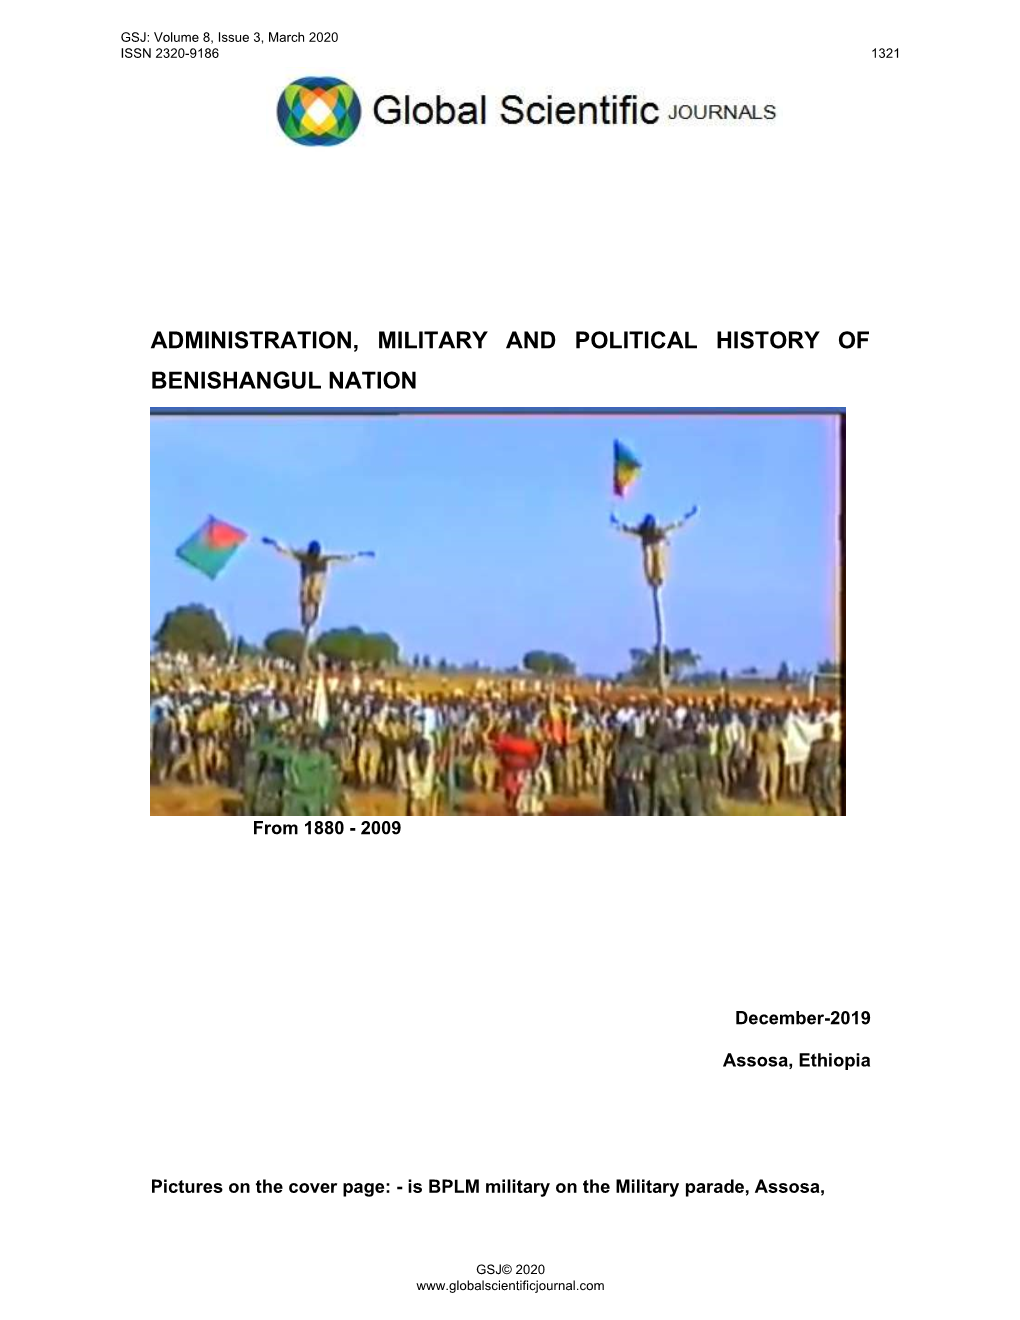 Administration, Military and Political History of Benishangul Nation